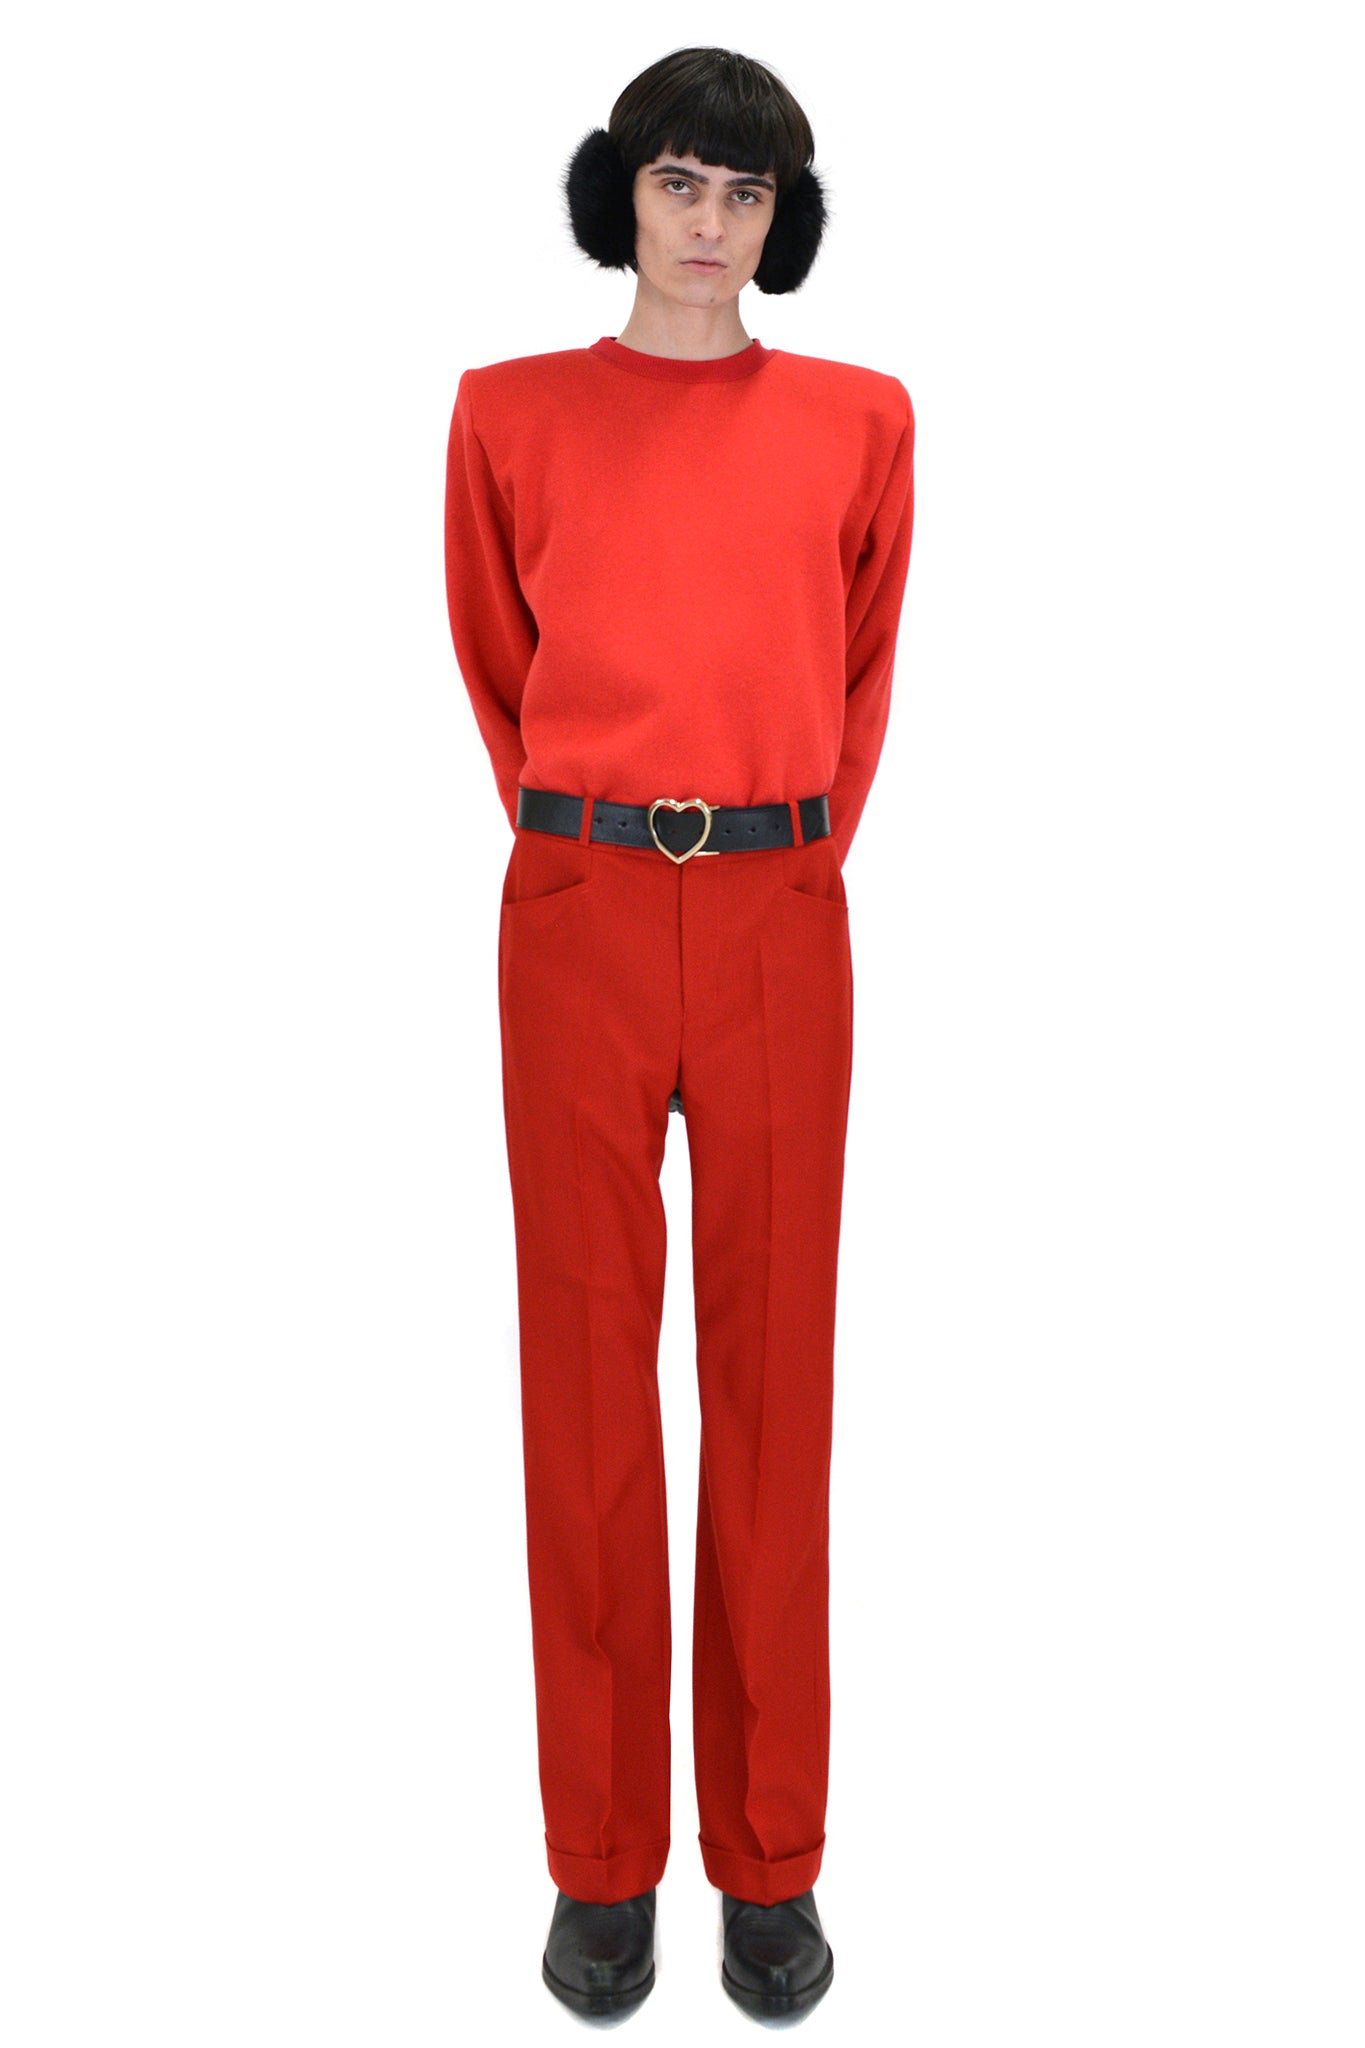 Ernest W. Baker Cuffed 70s Trousers, Red